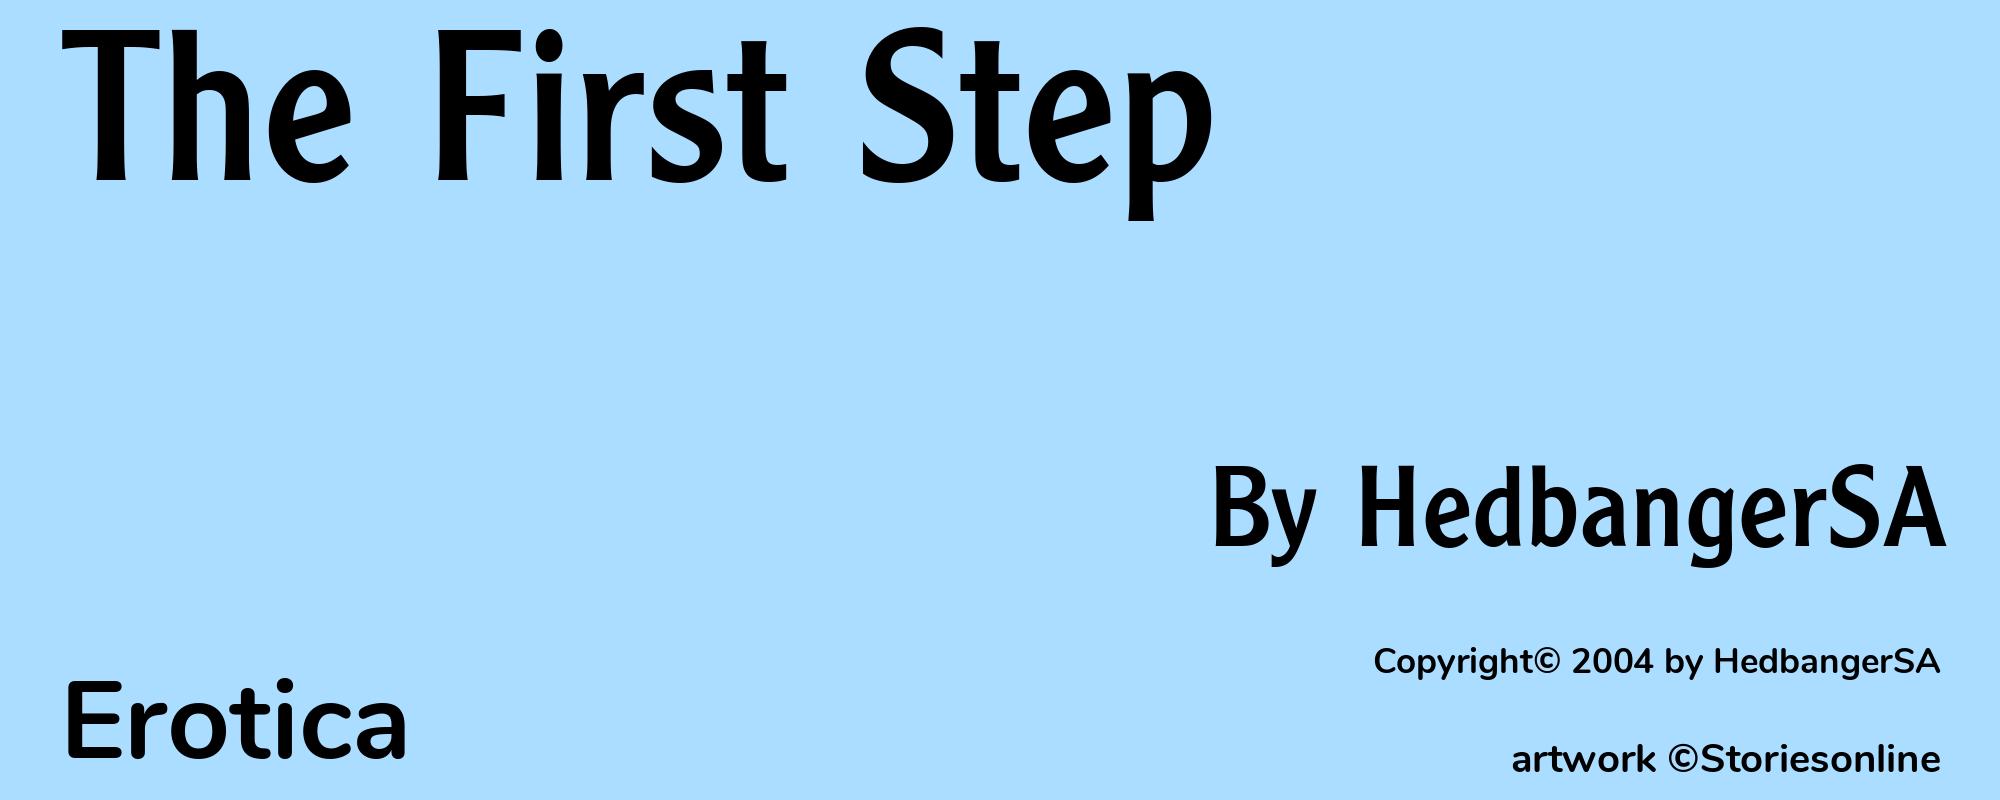 The First Step - Cover